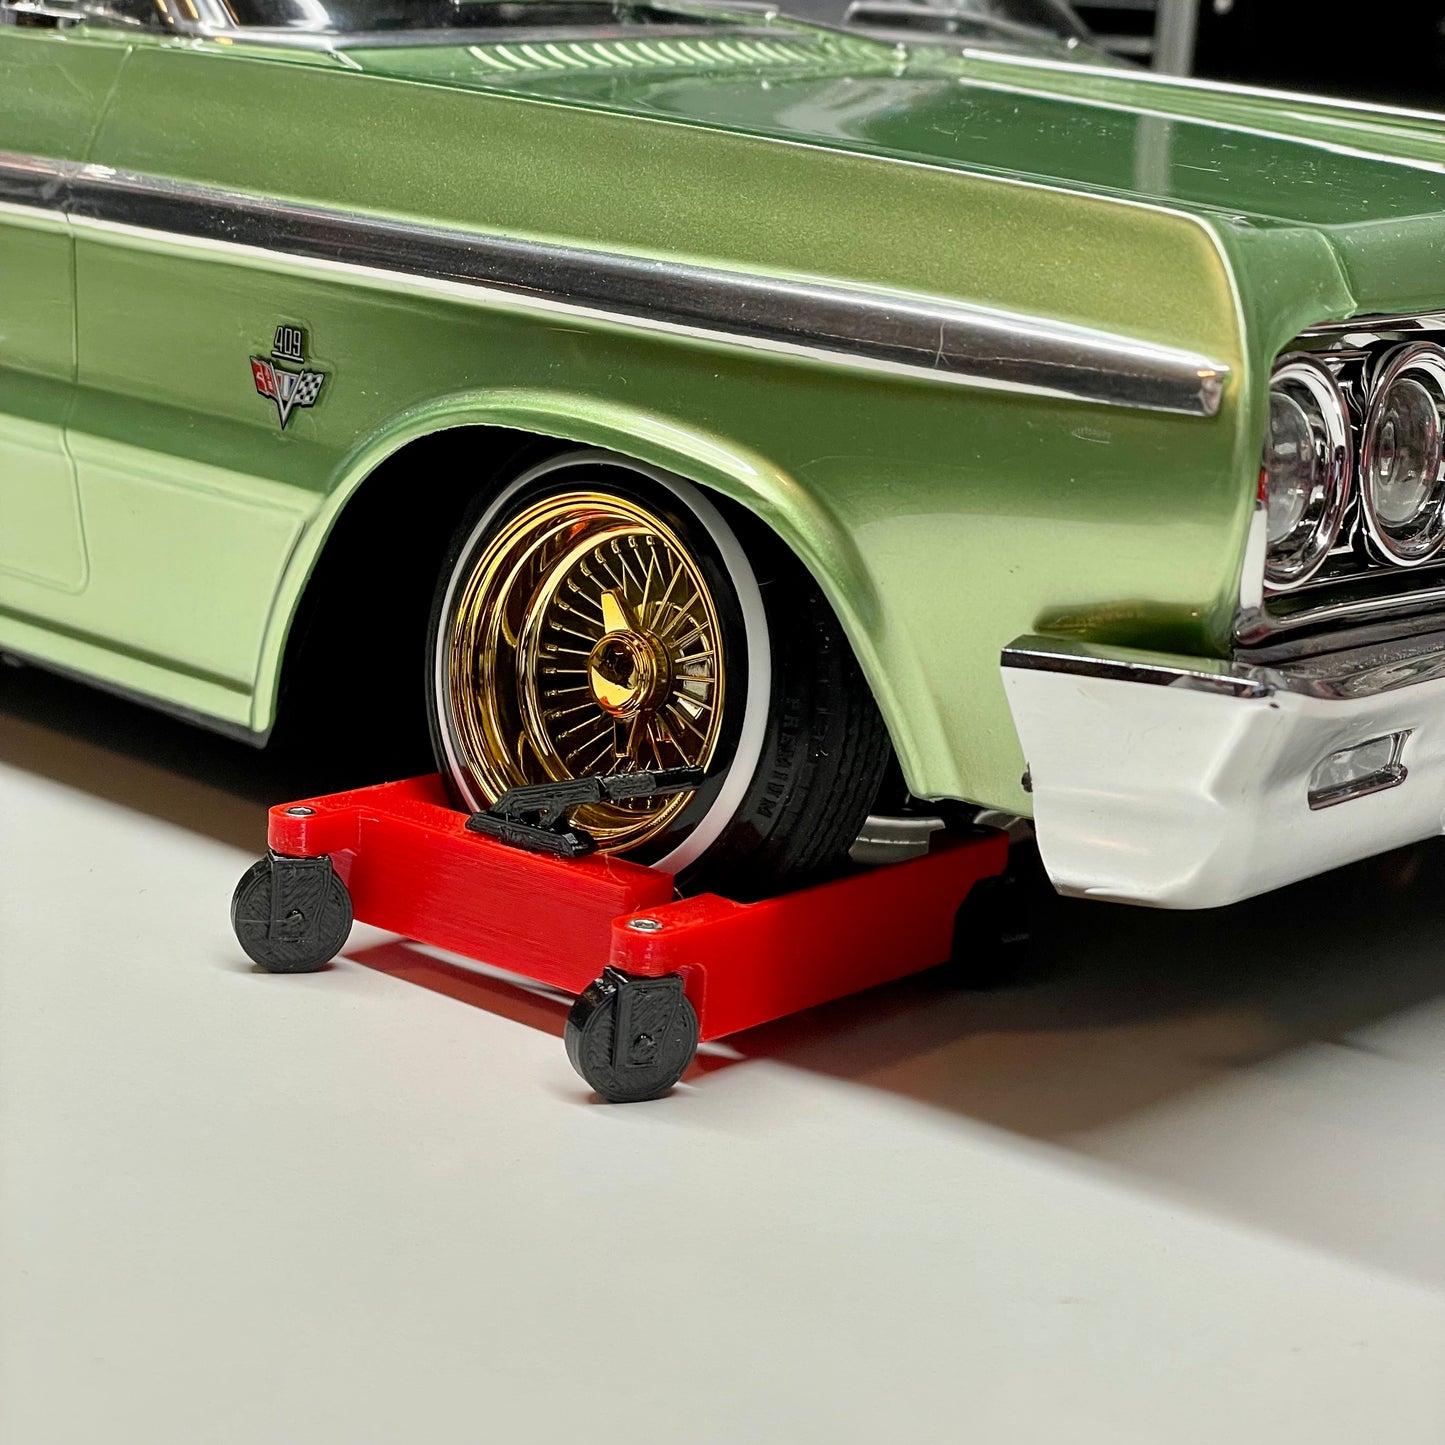 1/10 Scale Wheel Dolly (Set of 4), Adjustable for Most 1/10 Scale Vehicles Scale Garage Diorama